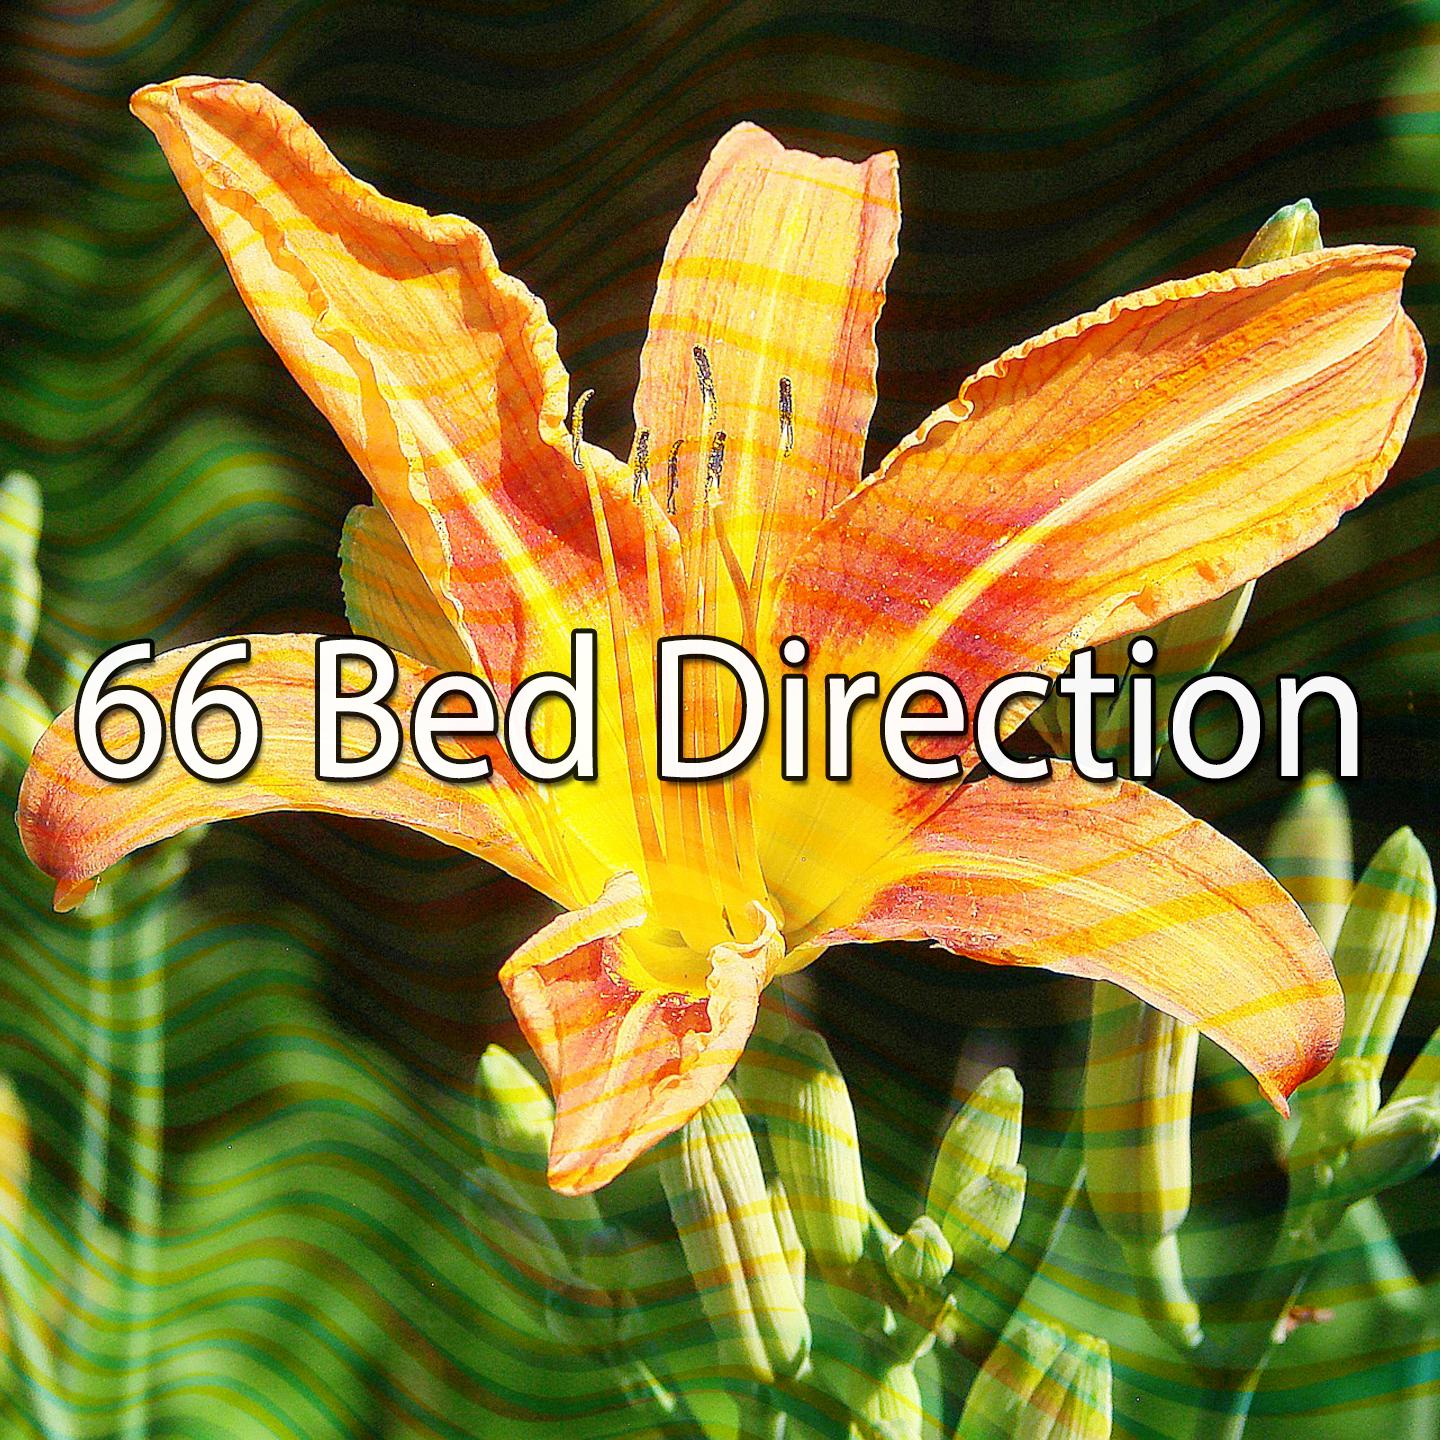 66 Bed Direction